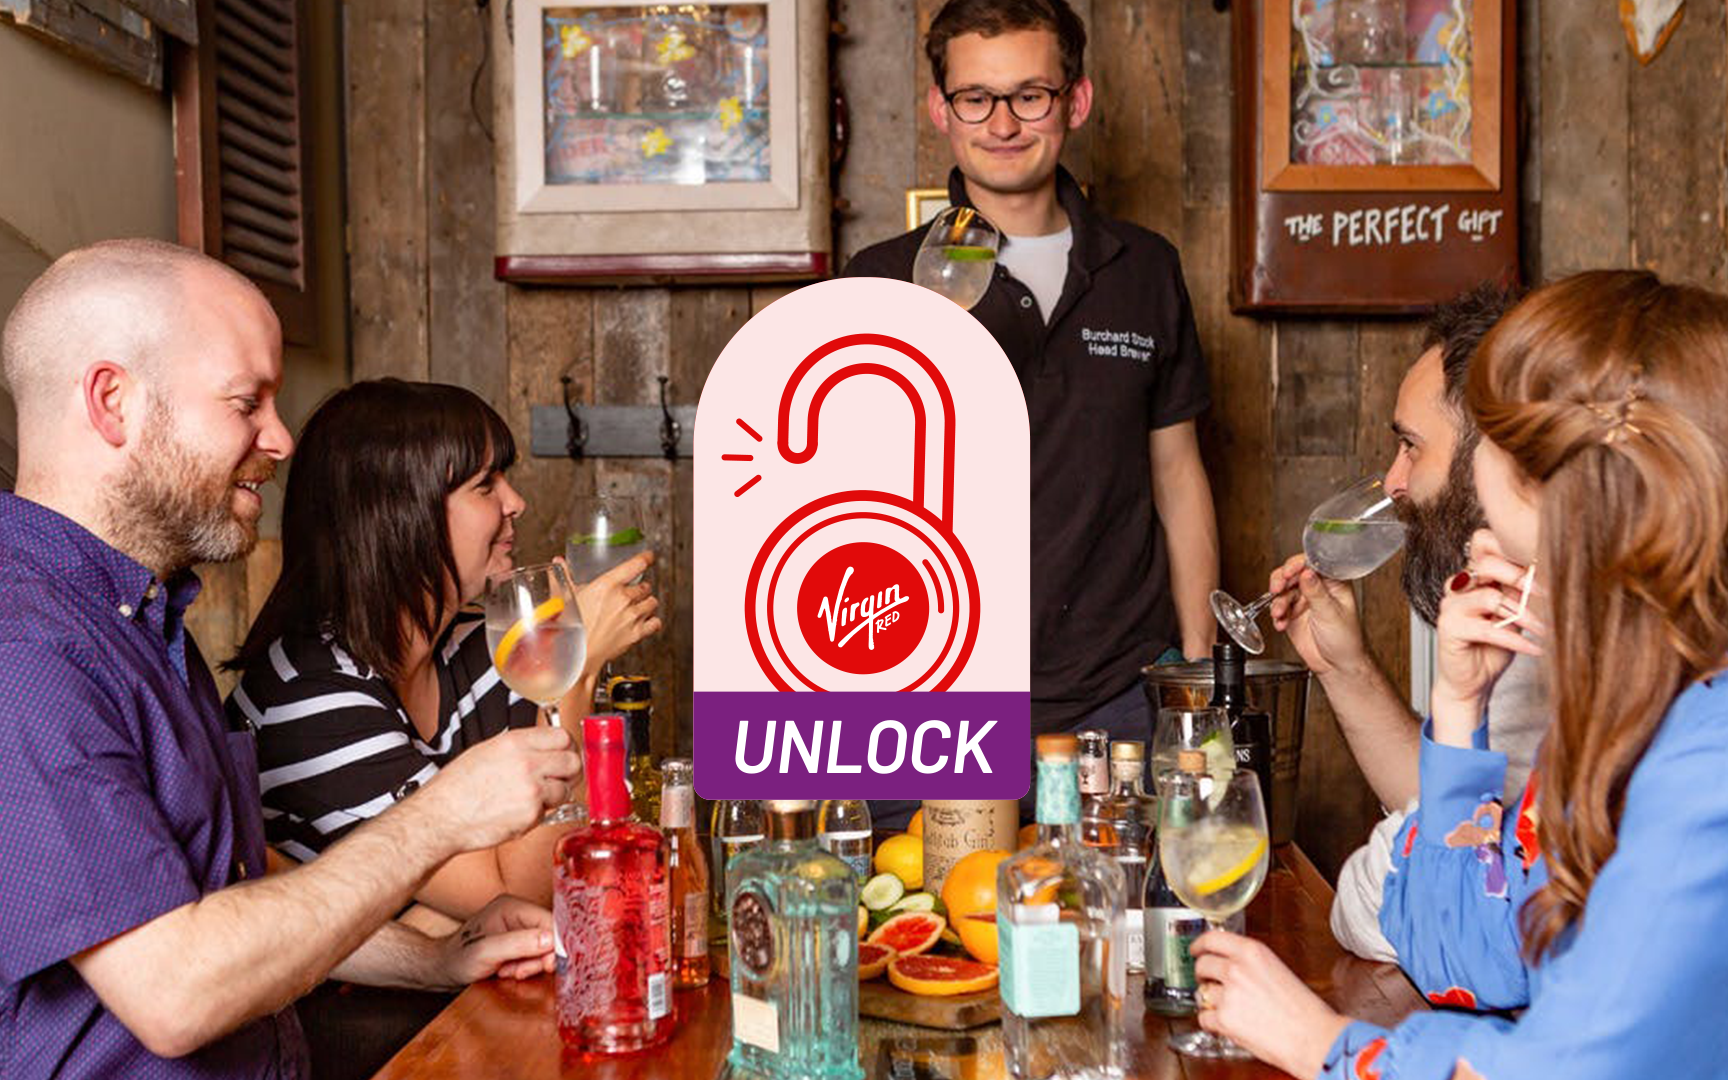 Image of a gin tasting experience with Virgin Experience Days with an Unlock Virgin Red sticker on top.